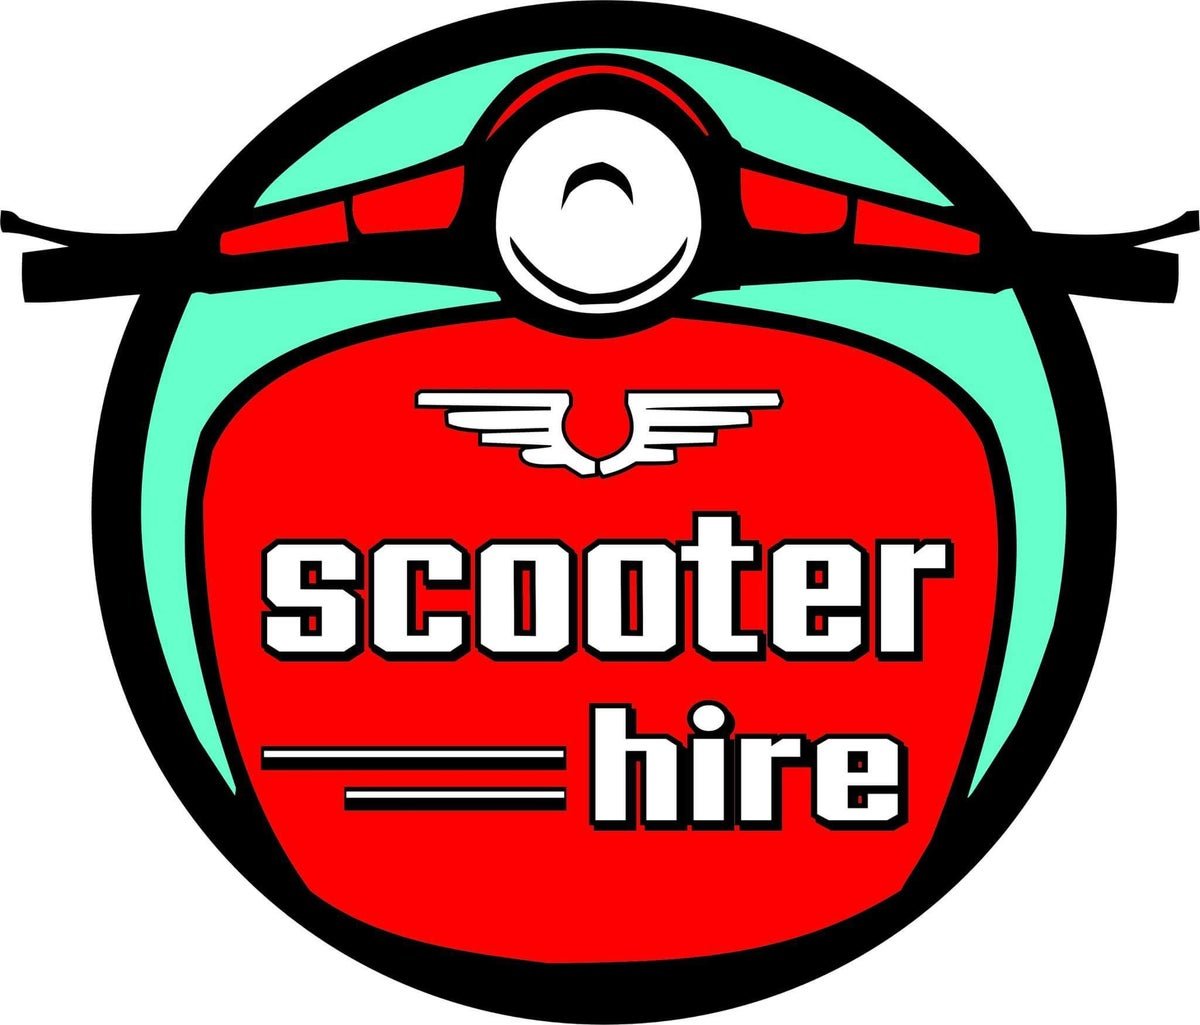 Image of Sydney Scooter Hire